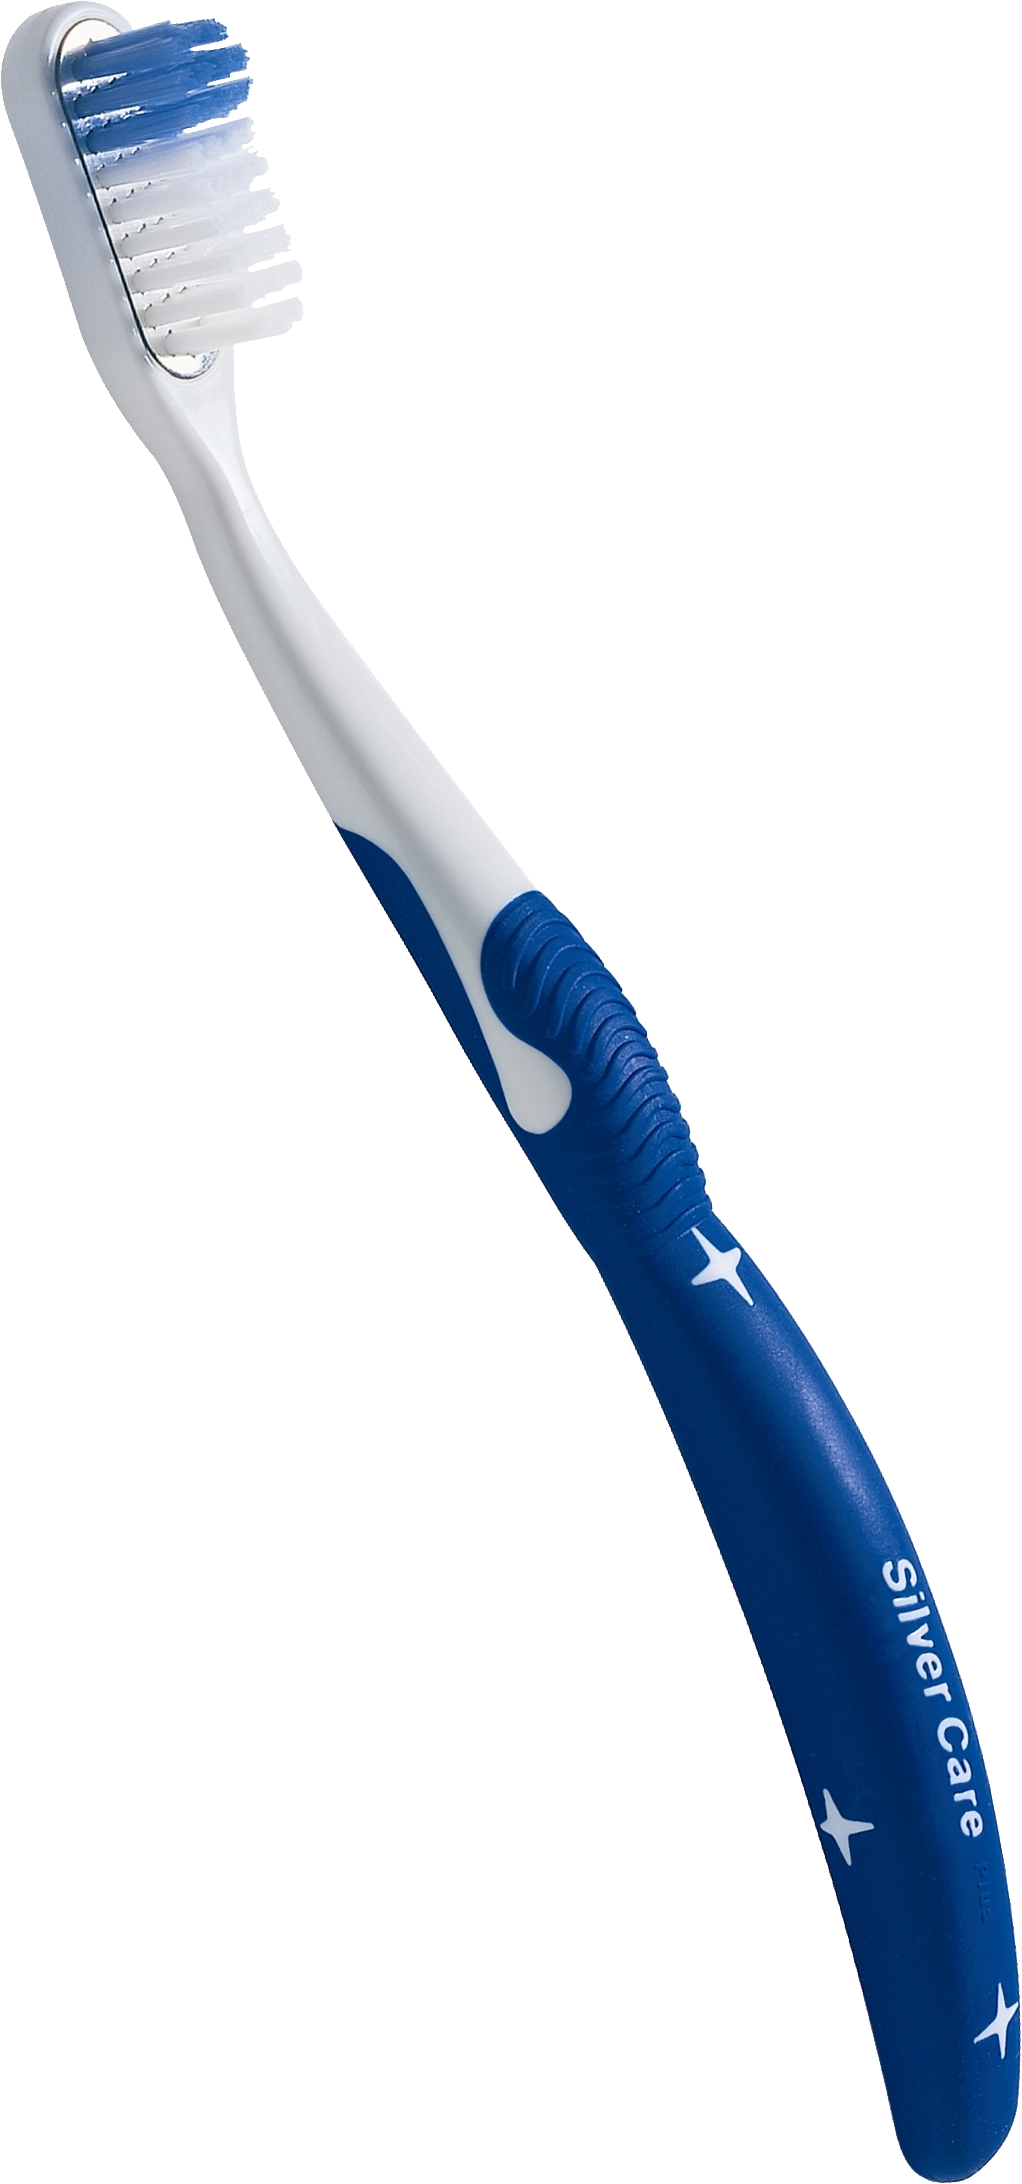 Toothbrush PNG High-Quality Image